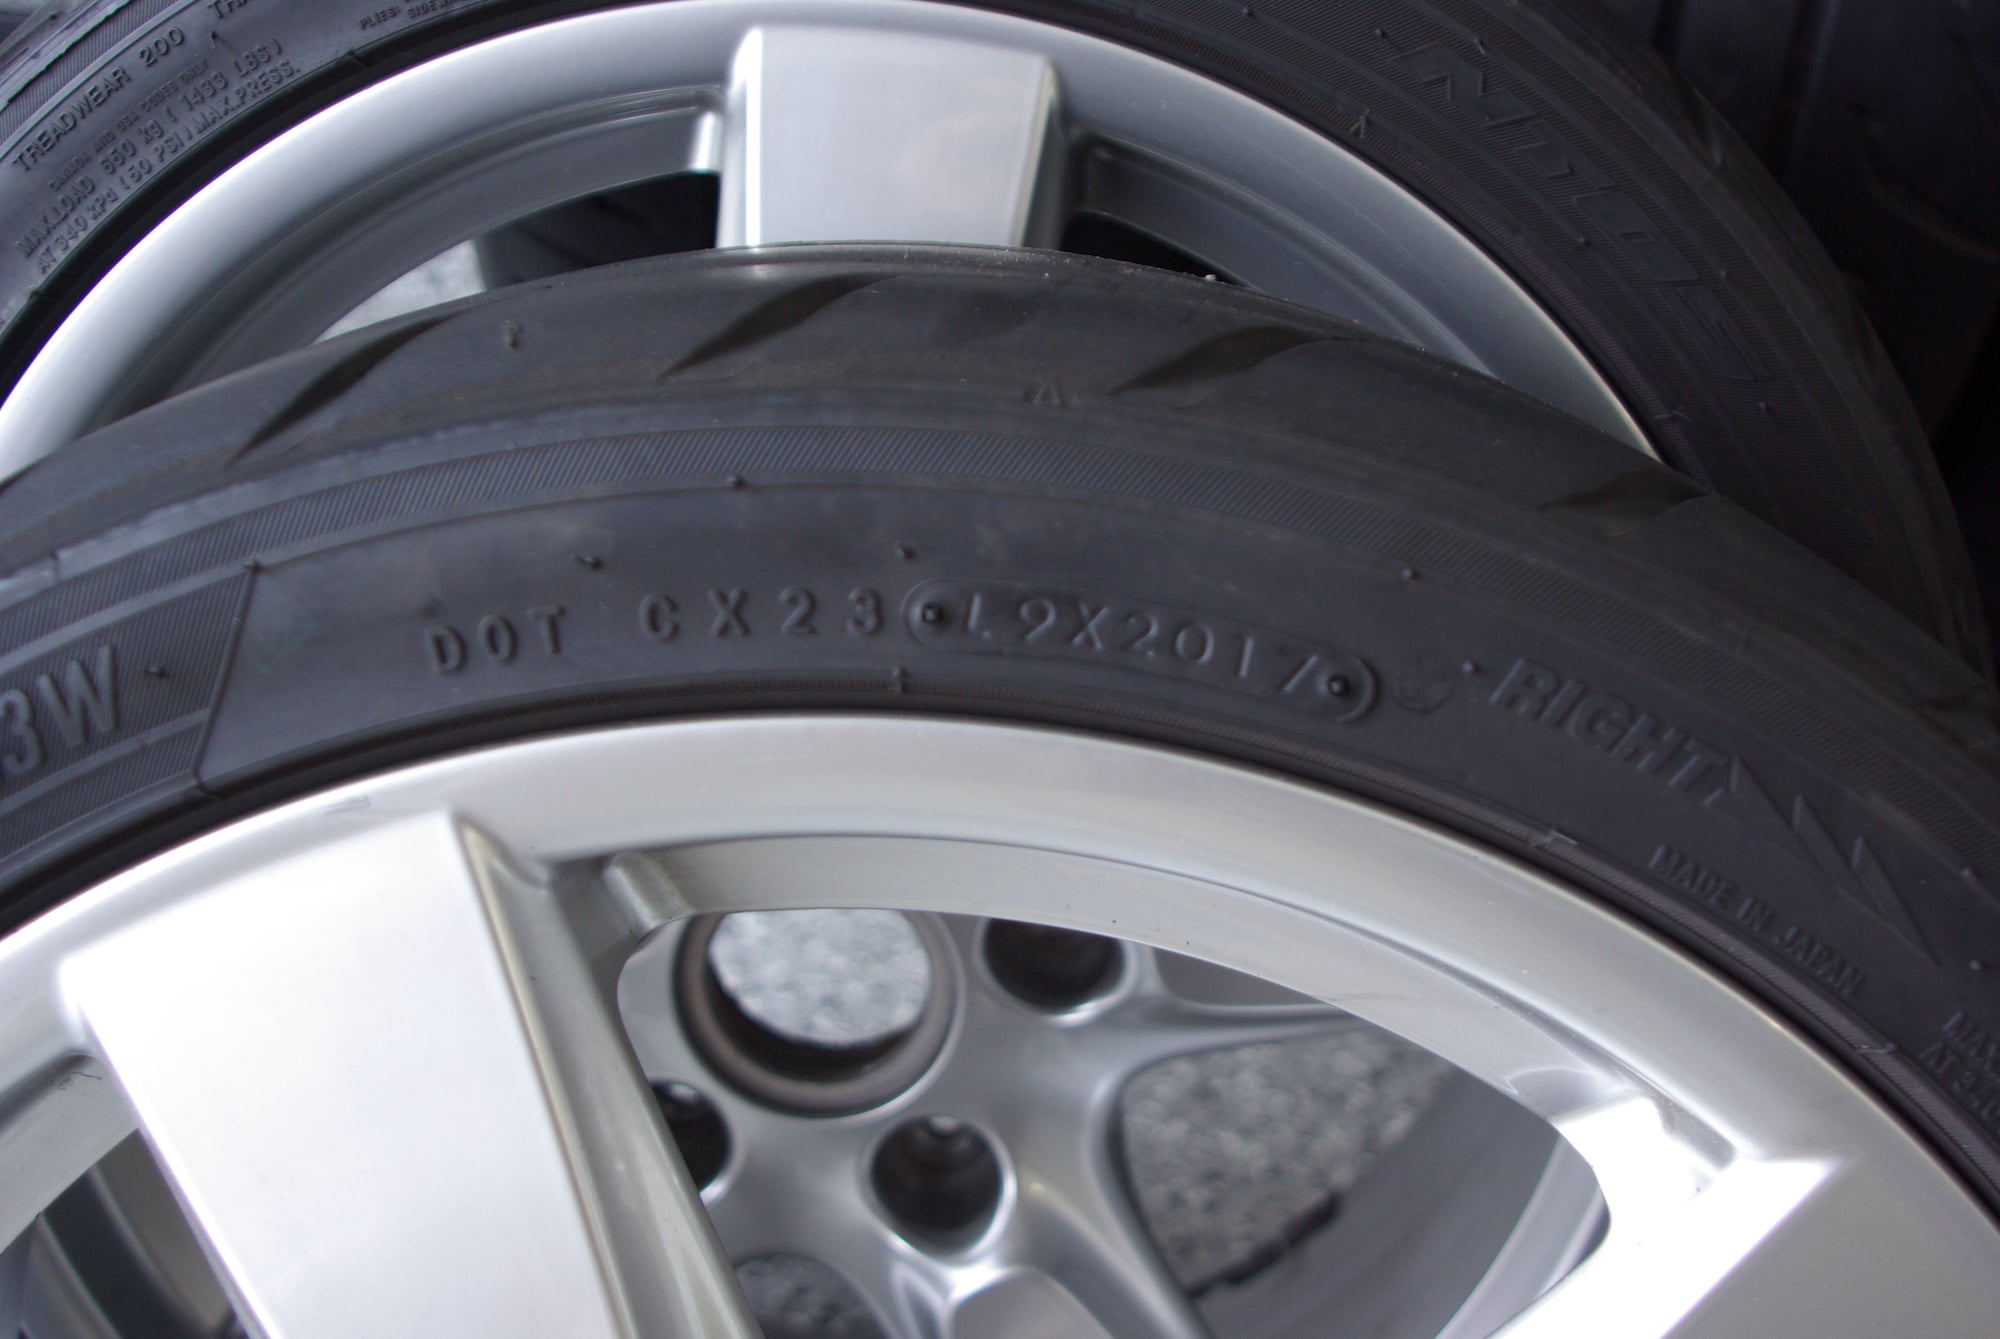 Wheels and Tires/Axles - 19" Cayman / Boxster 5 spoke Porsche wheels with Nitto NT05s - Used - 2013 to 2020 Porsche Boxster - 2014 to 2020 Porsche Cayman - Overland Park, KS 66224, United States